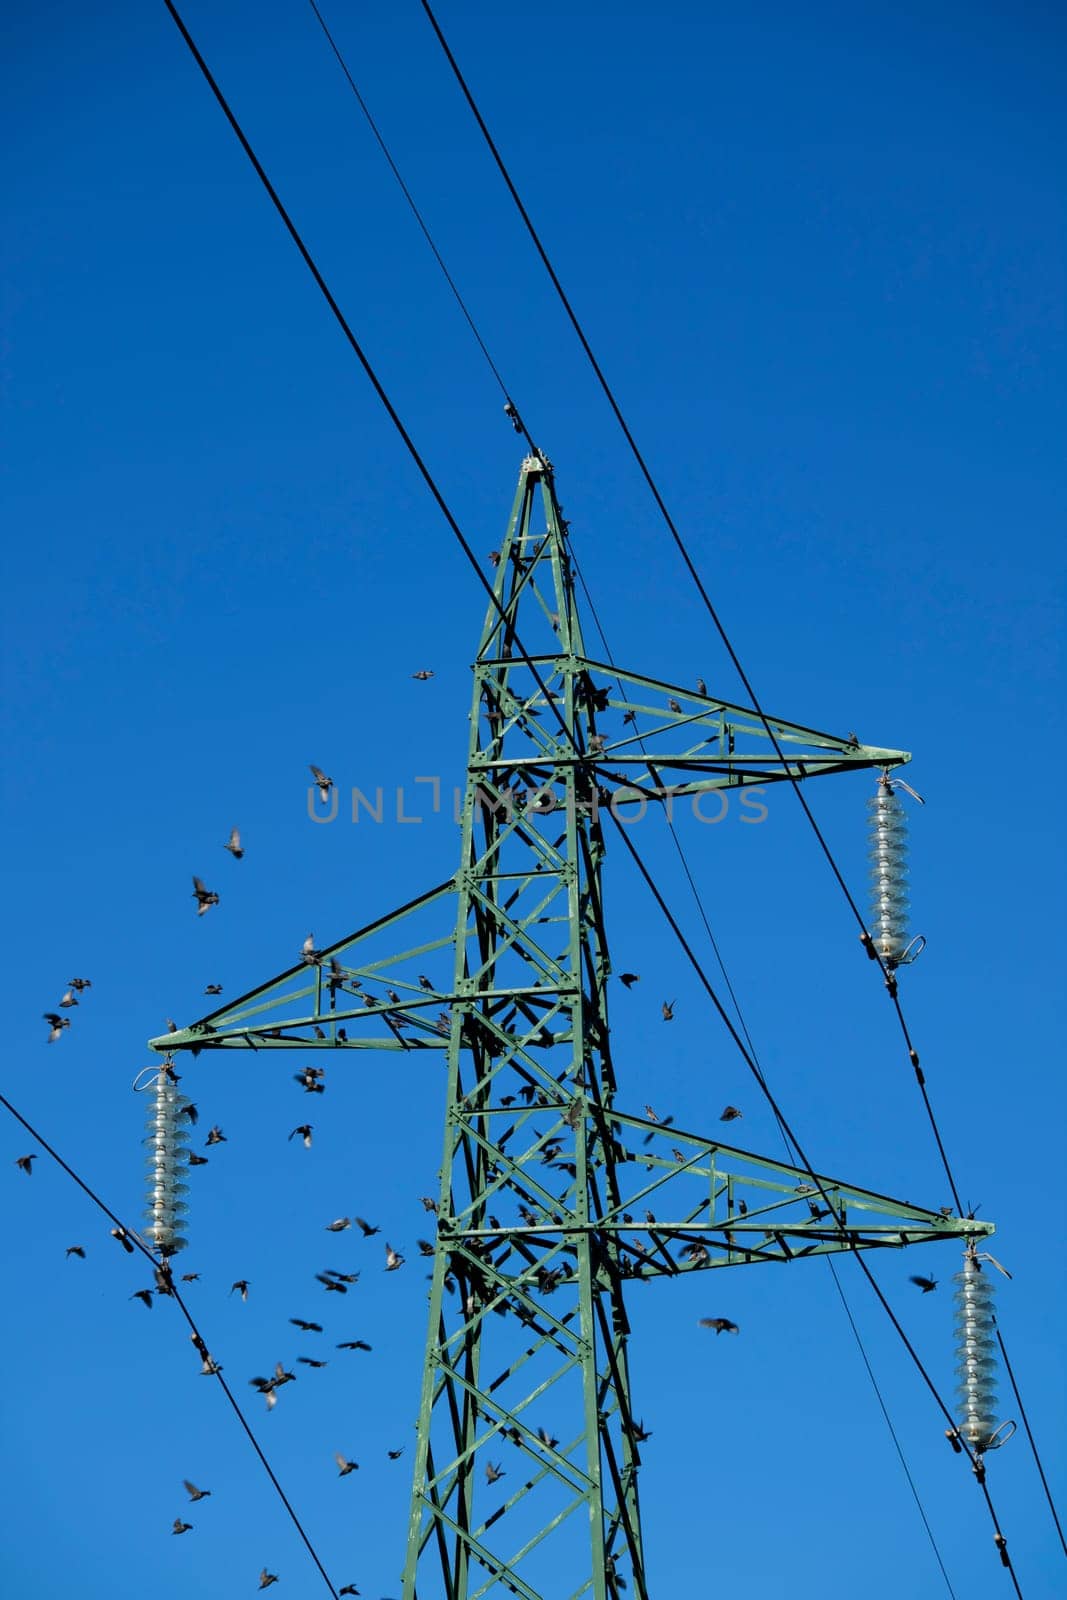 Photographic documentation of a flock of birds on an electricity pylon 